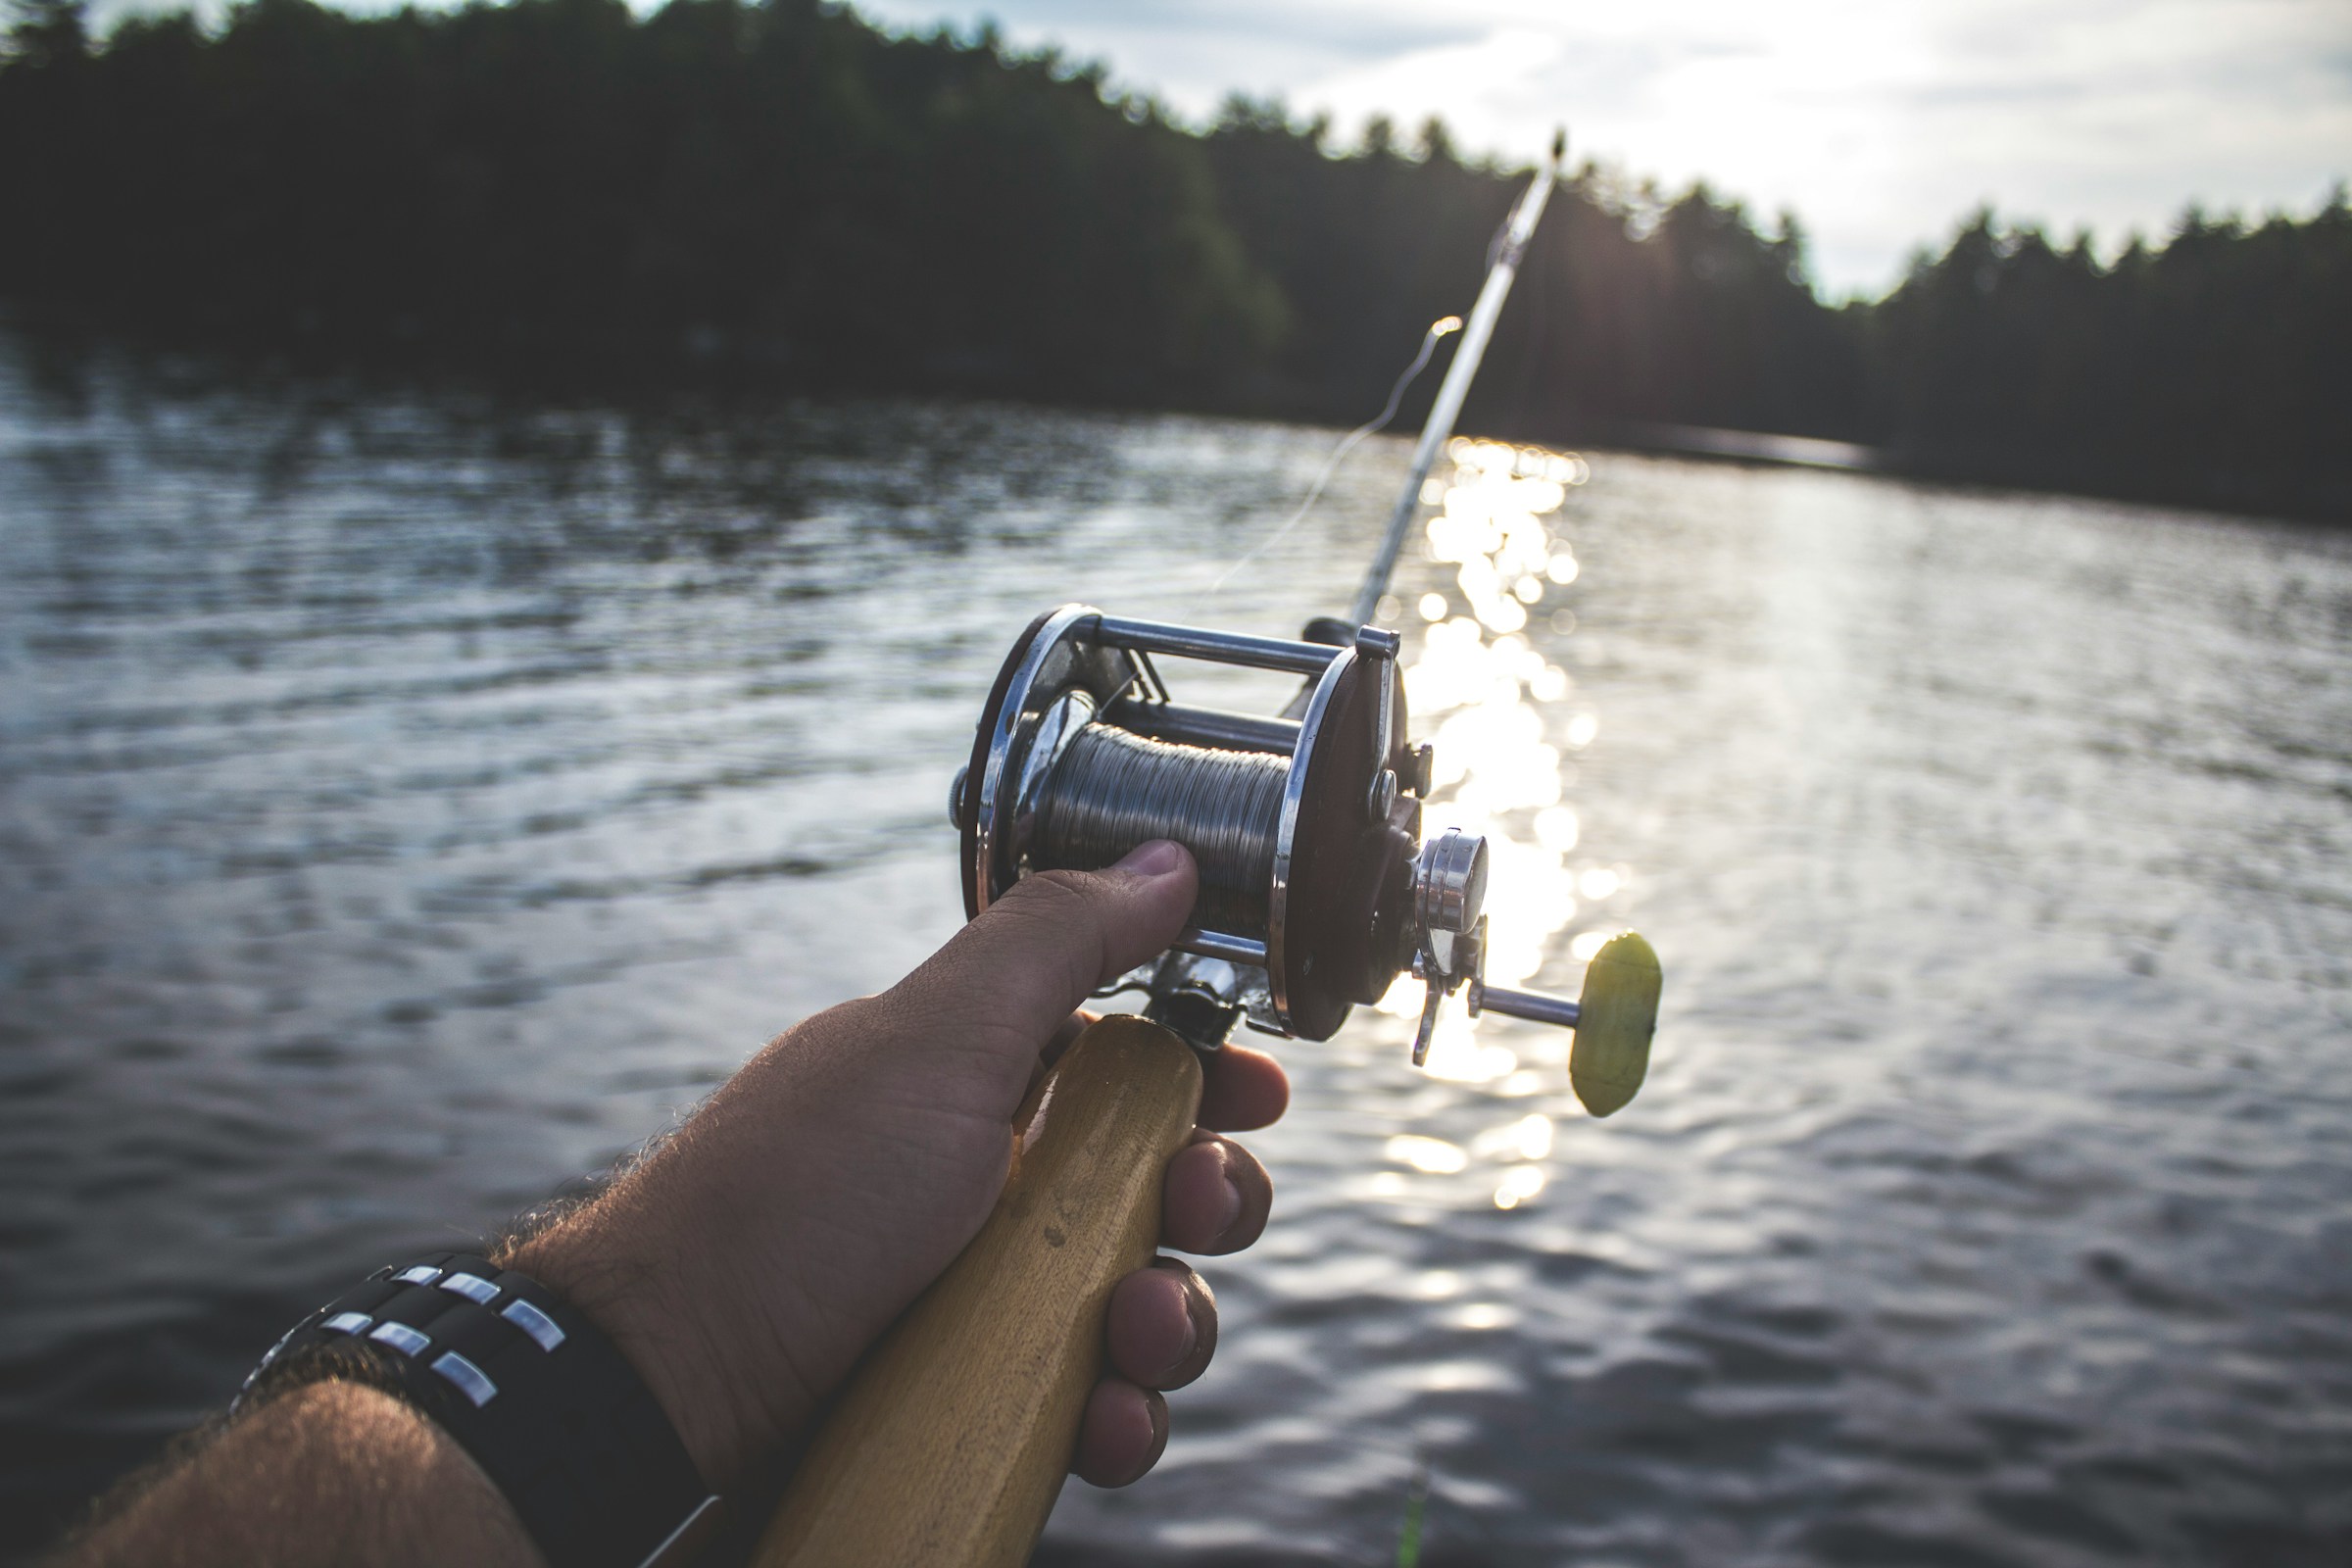 A person holding a fishing rod | Source: Unsplash